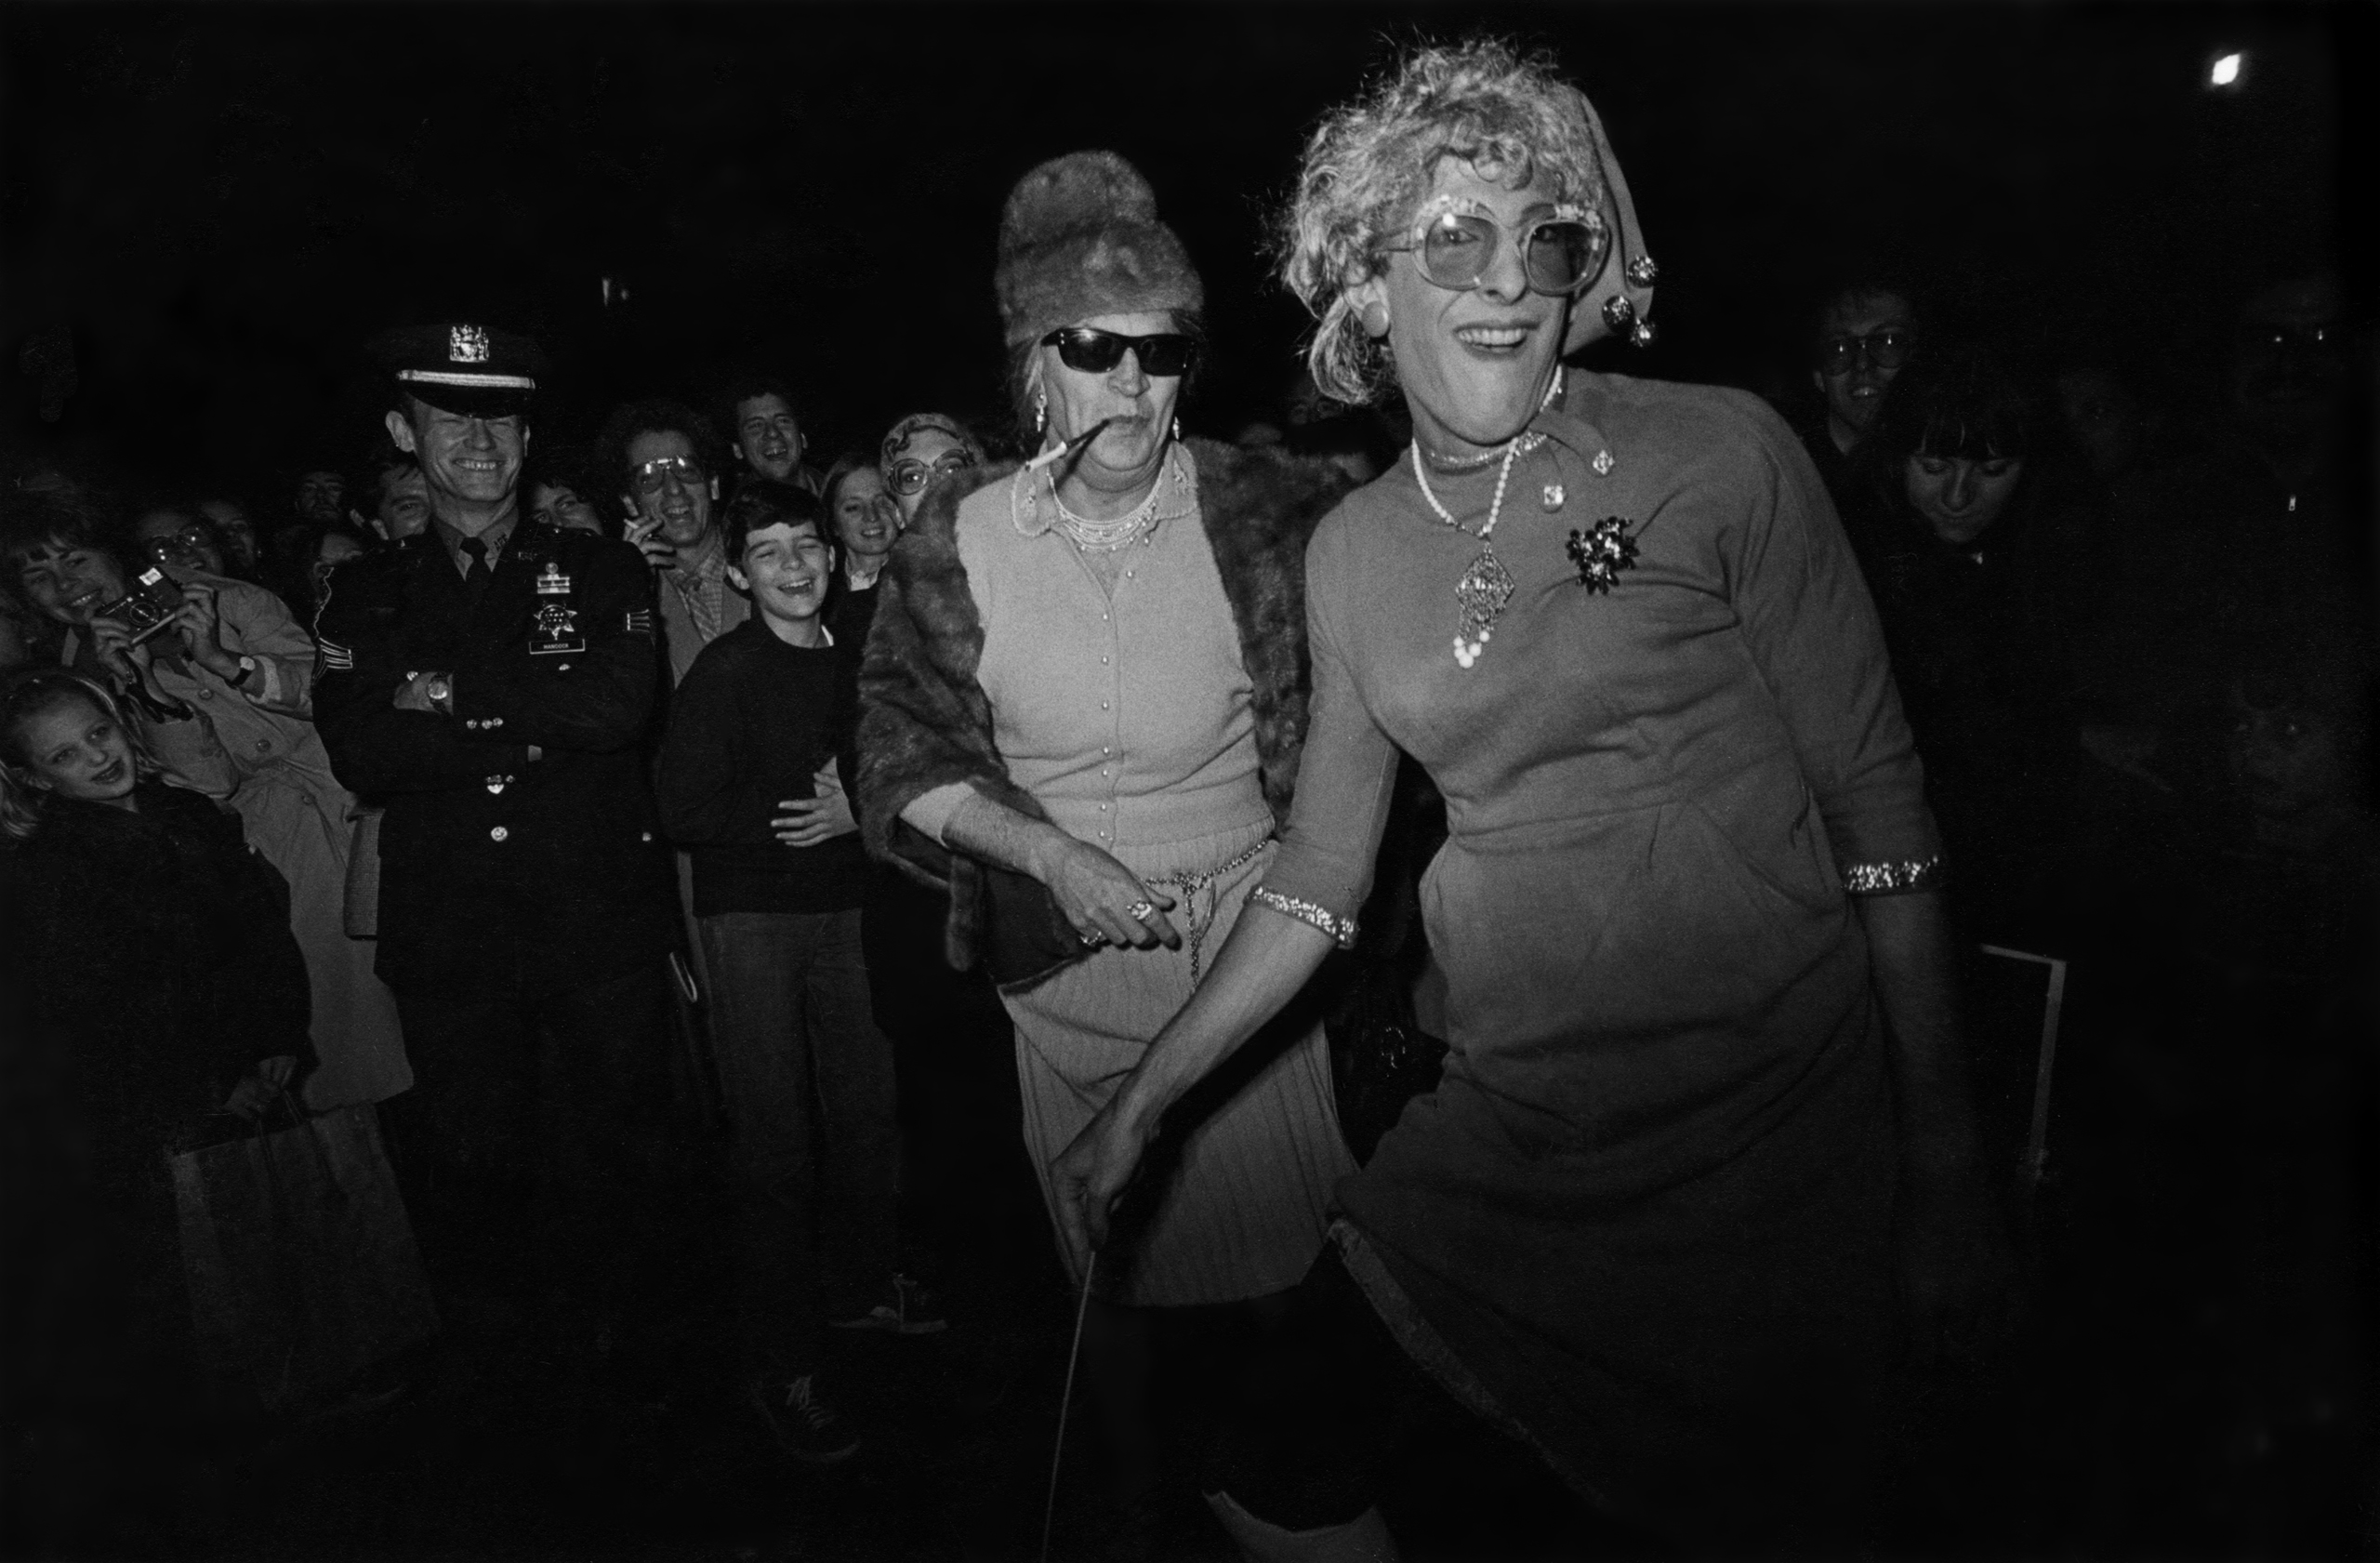 Two men in drag marching in the New York City Halloween Parade, 1980.